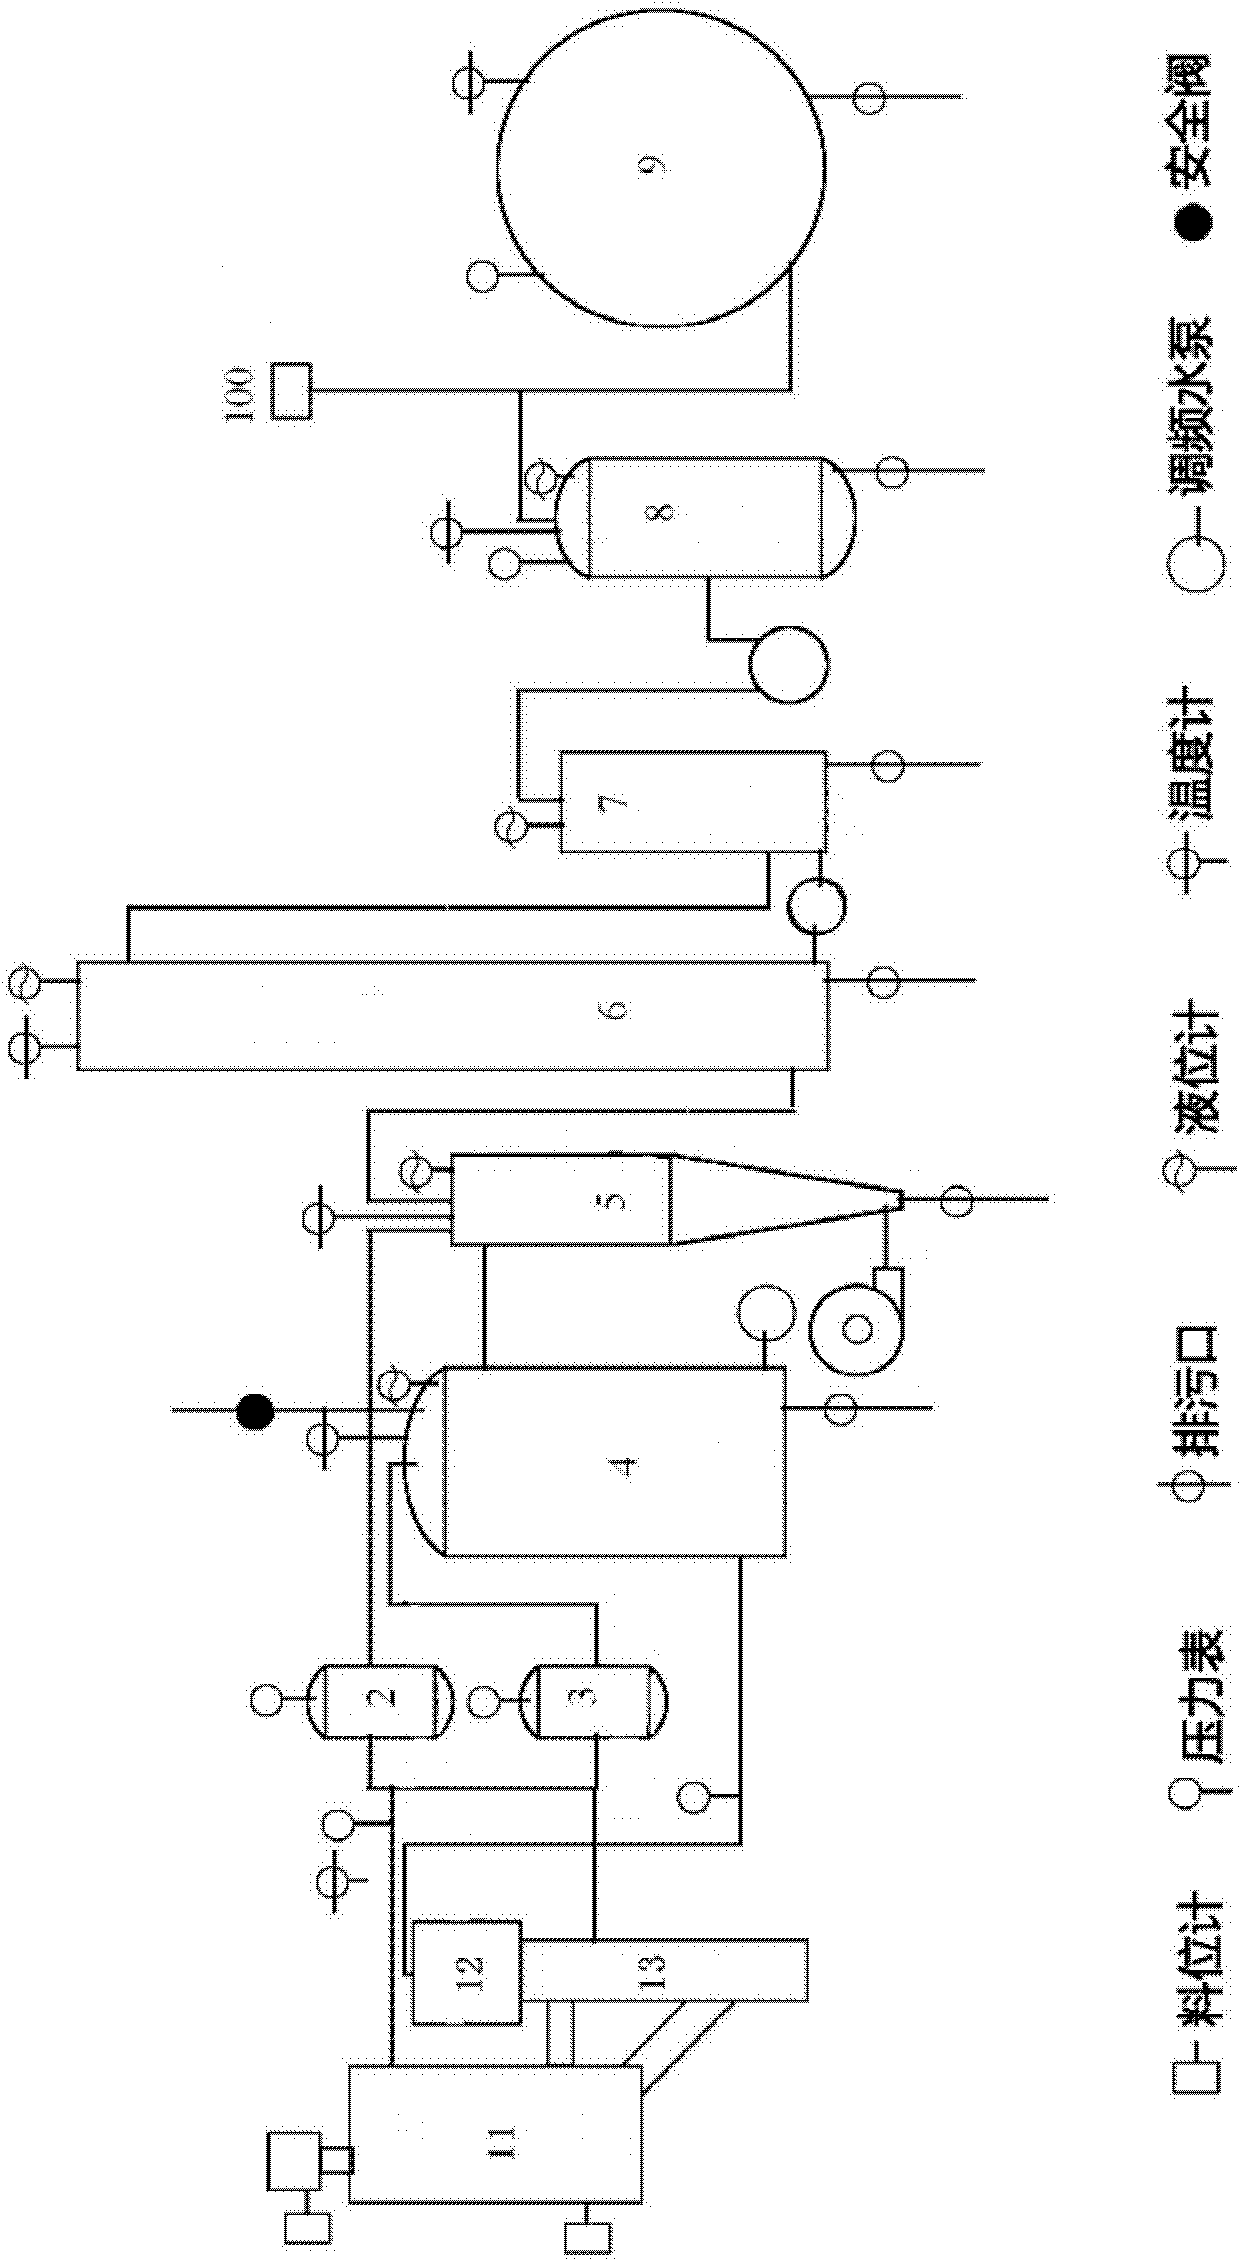 Plasma garbage gasification device and process